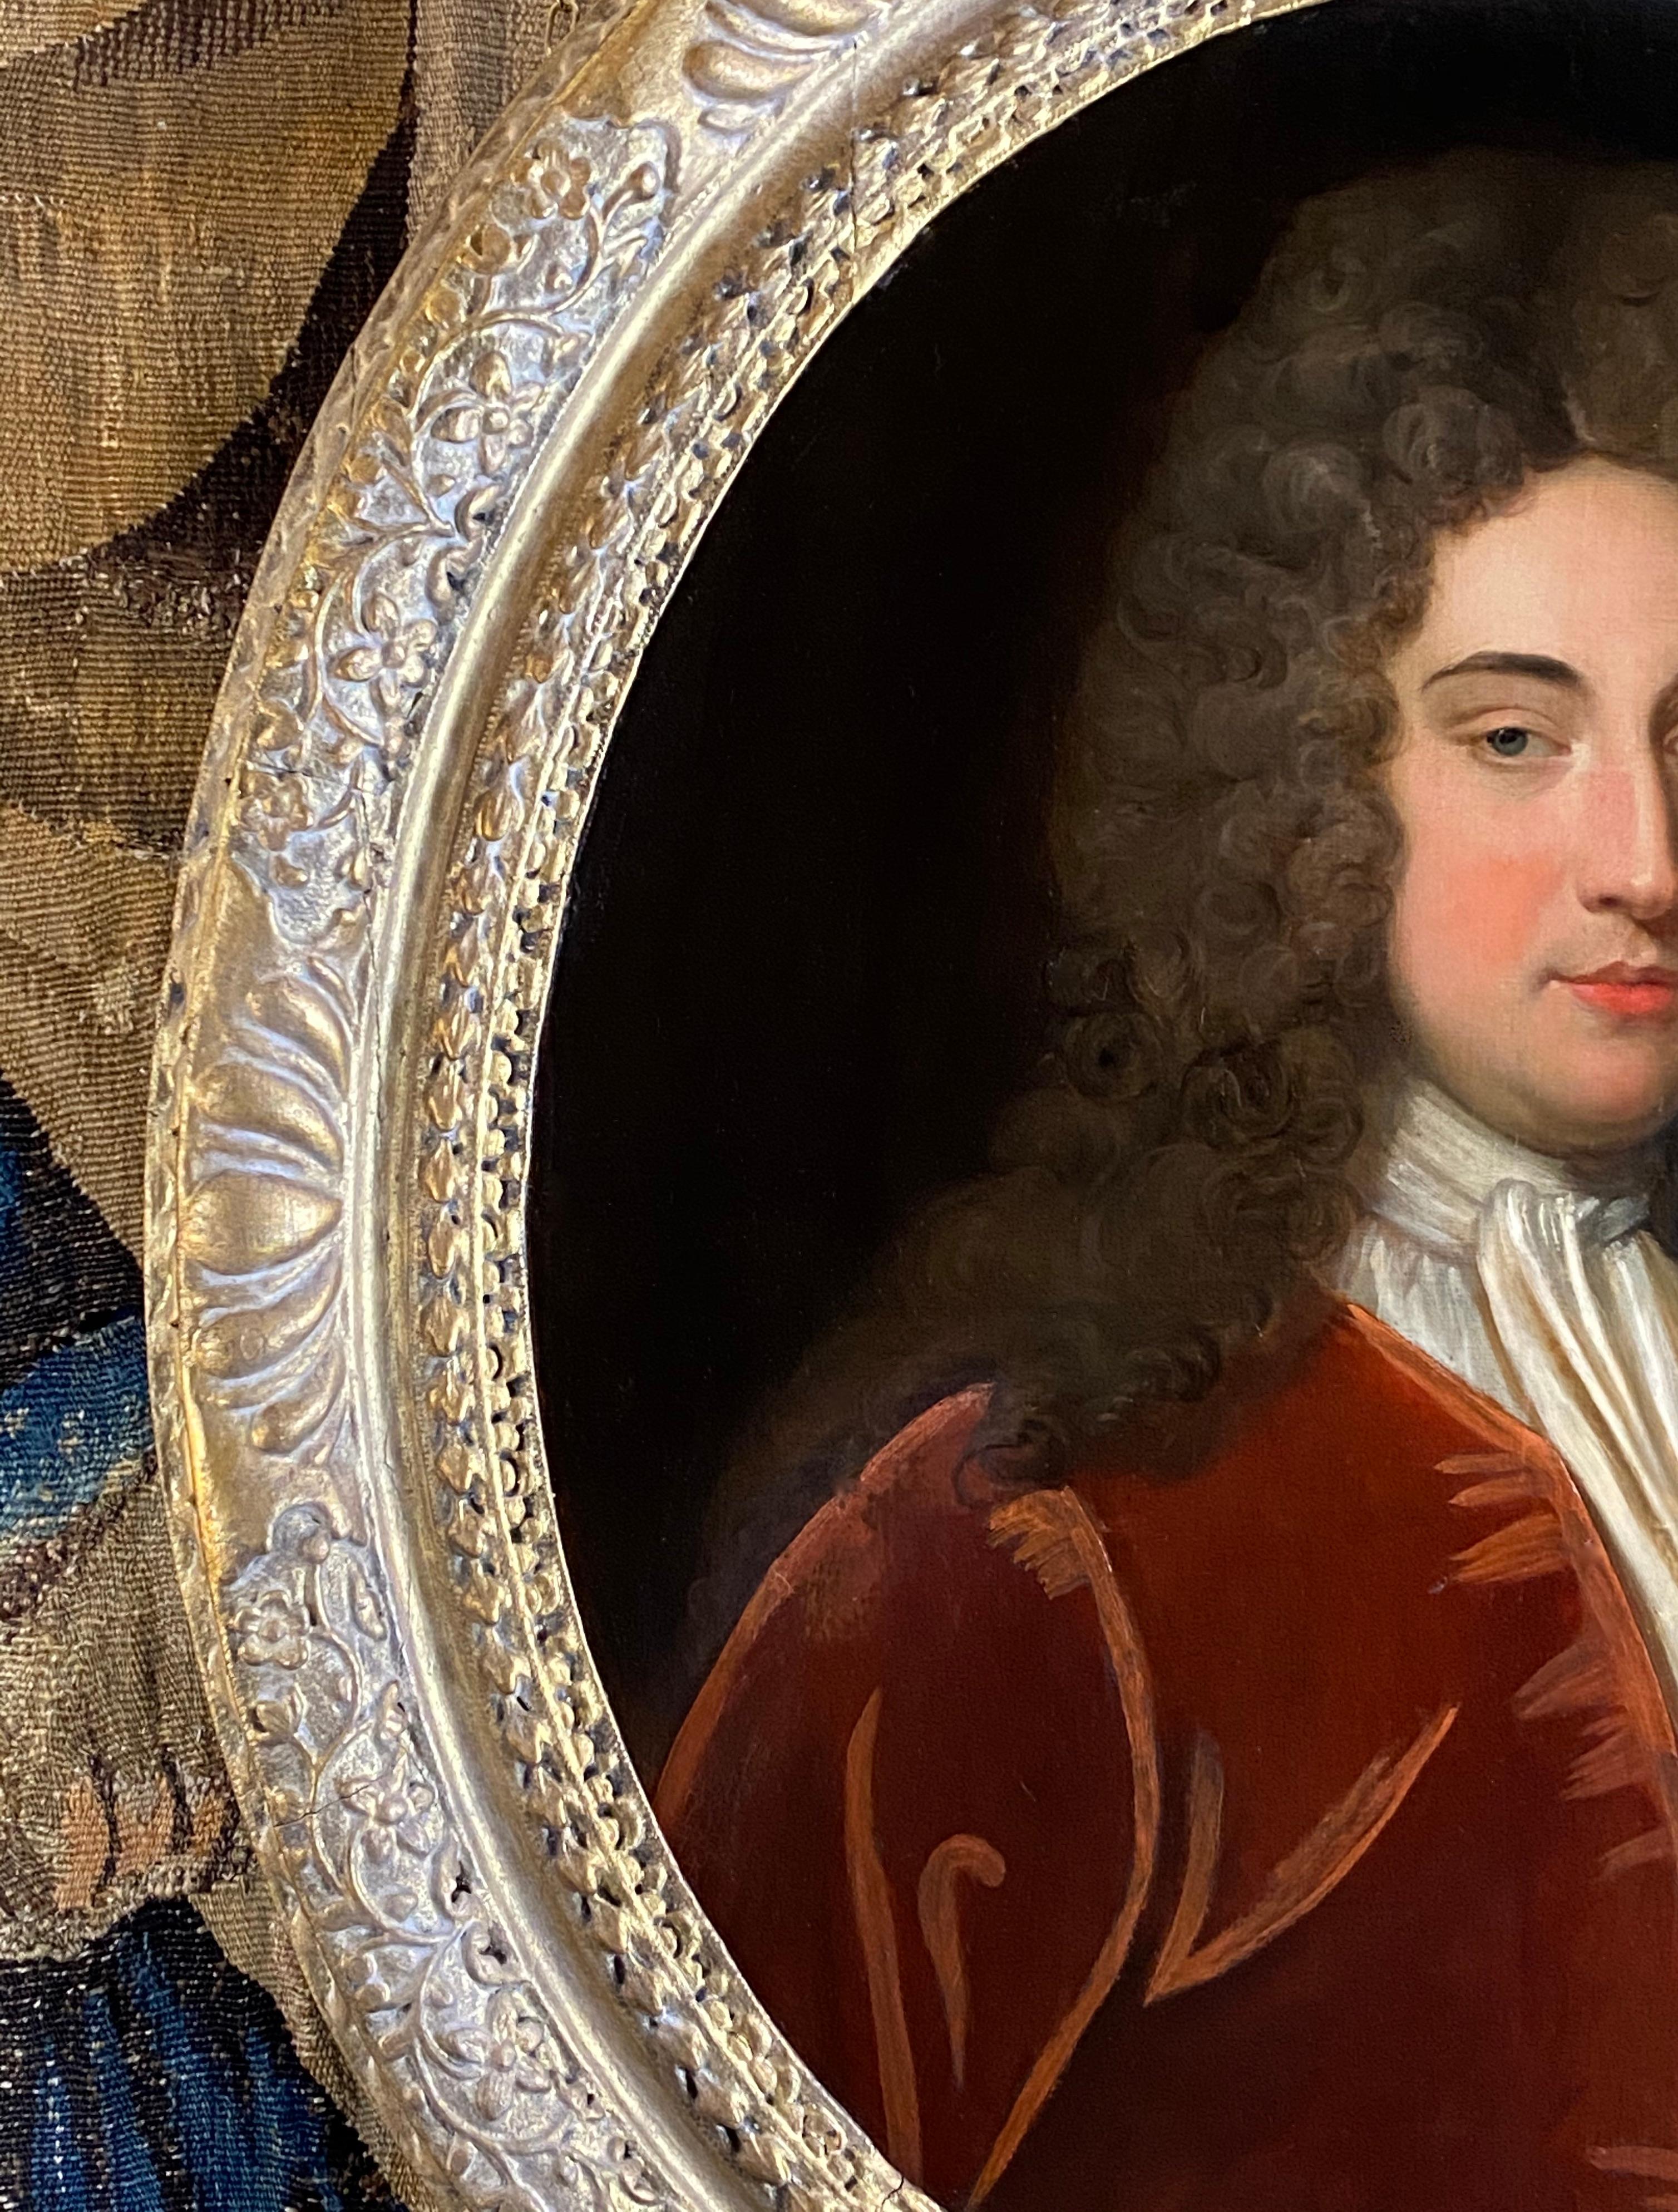 EARLY 18TH CENTURY OVAL PORTRAIT OF A GENTLEMAN - CIRCLE OF JONATHAN RICHARDSON (1667-1745)
                                                                                                           
A highly decorative and richly coloured early